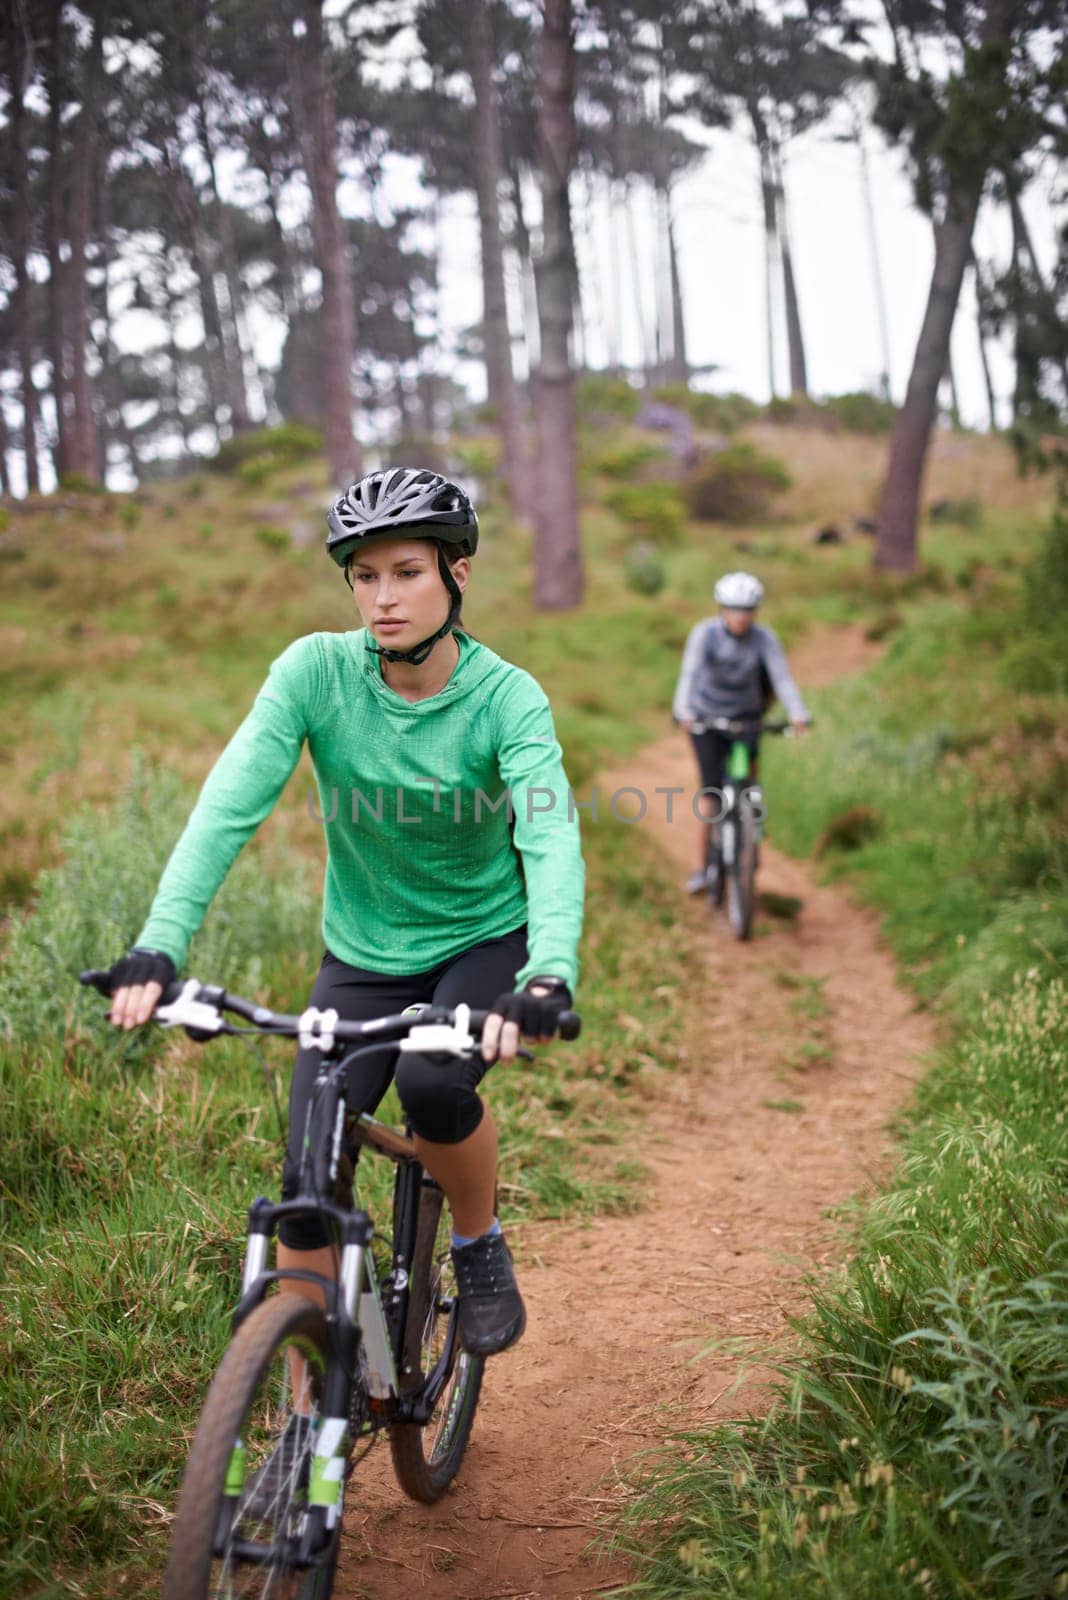 Woman, bike and cycling outdoor on trail for exercise, workout or adventure in forest with fitness. People, cyclists and bicycle with helmet in woods or off road for sport, hobby and travel in nature.